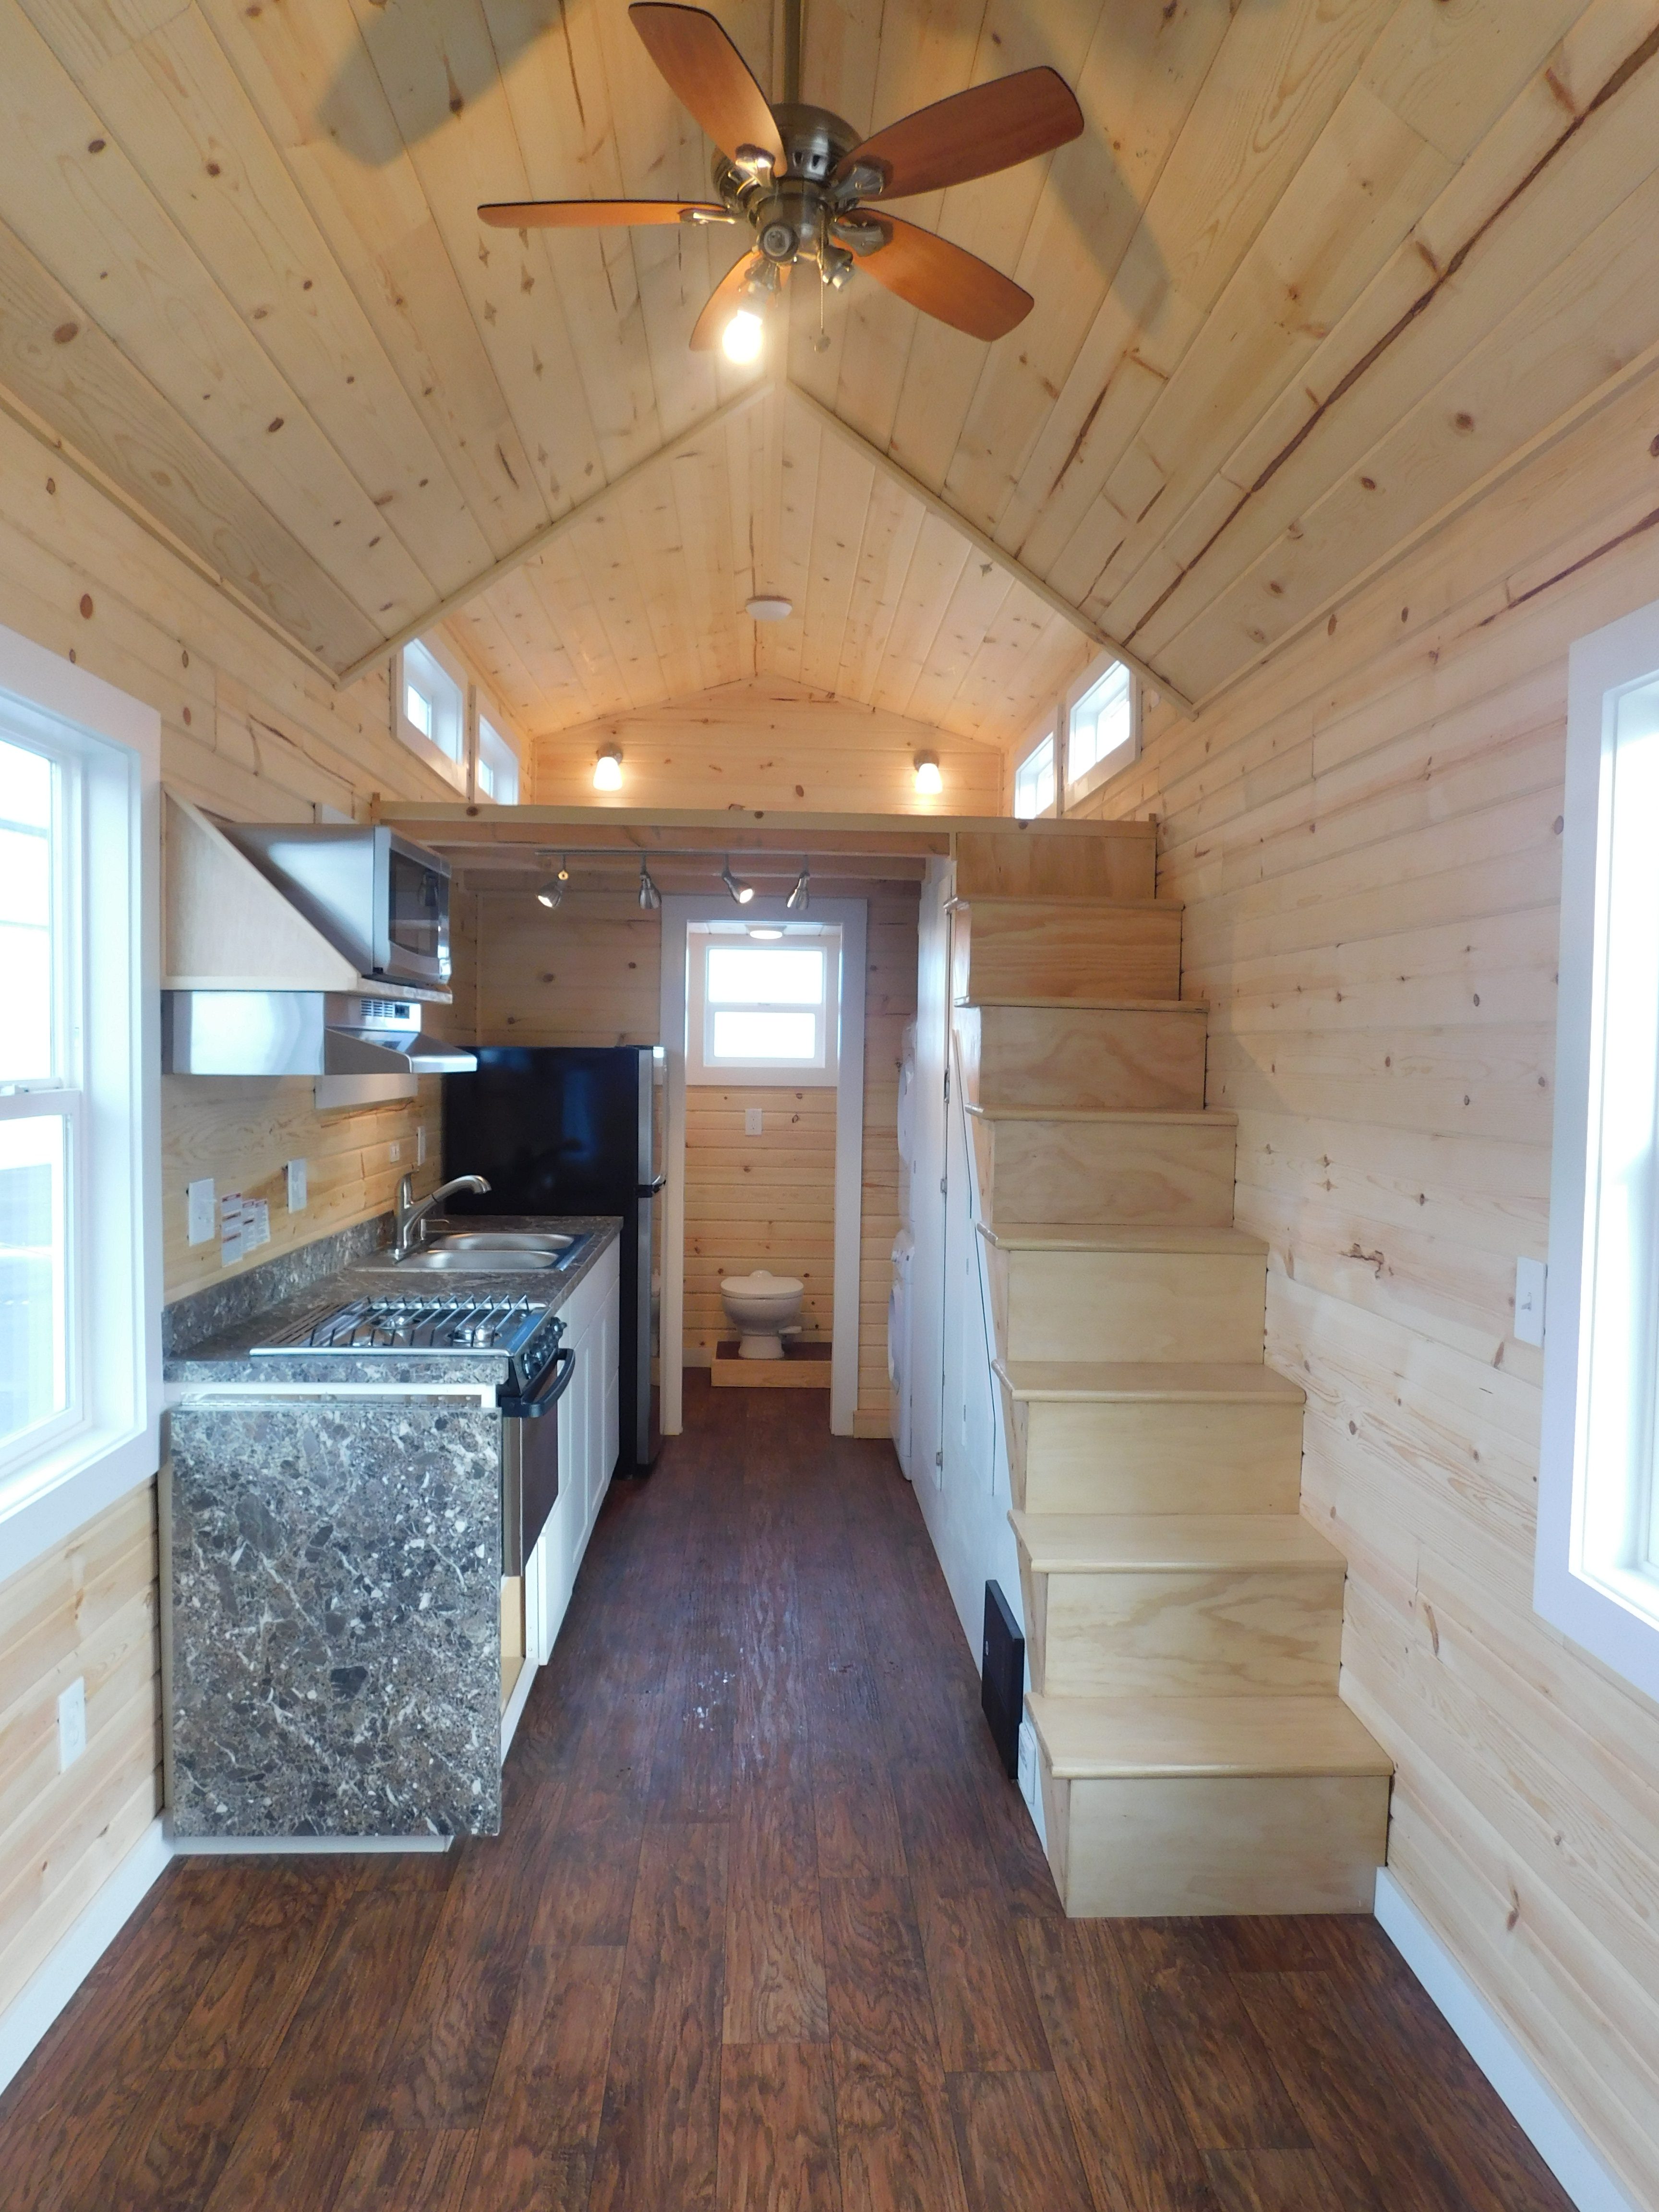 Tiny Homes For Students University Of Southern California Students Are ...